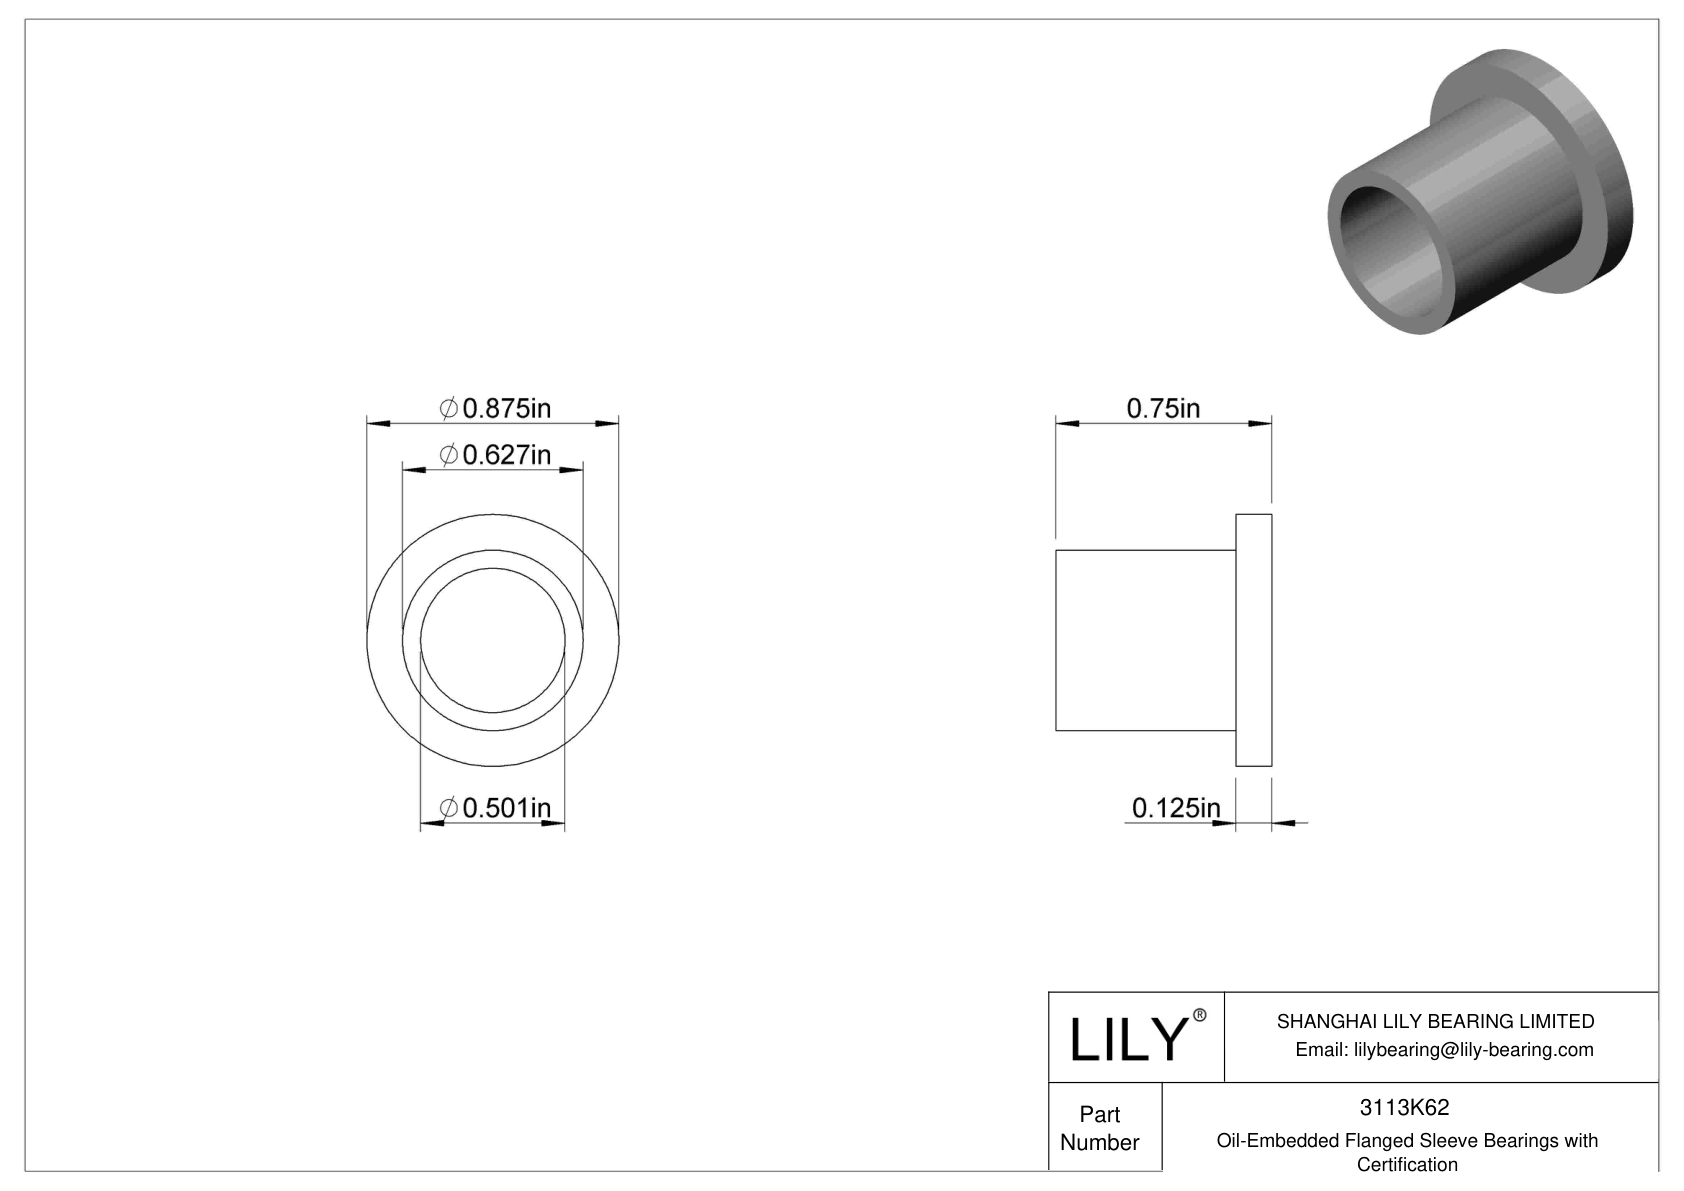 DBBDKGC Oil-Embedded Flanged Sleeve Bearings with Certification cad drawing